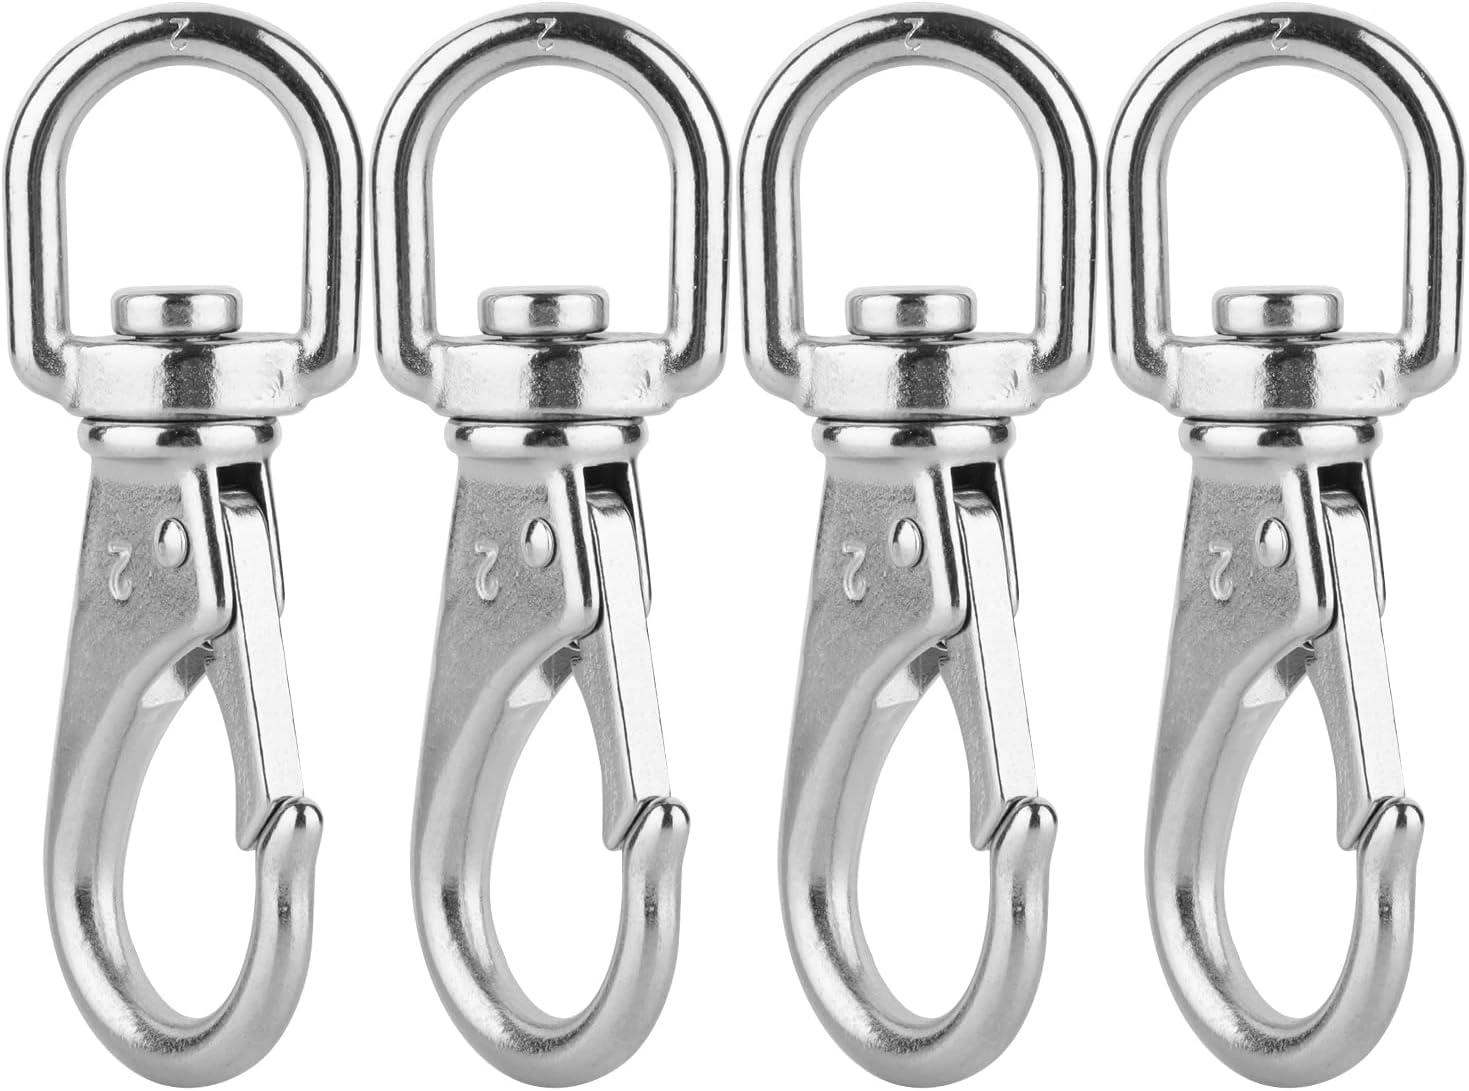 Mixiflor Stainless Steel Swivel Eye Snap Hook, 4 Pack (4 Inch) Swivel Snap  Hook Flag Pole Clips, Rotating Diving Clips Spring Hooks for Flag Poles,  Dog Leash, Key Chain, Boat Anchor Rope